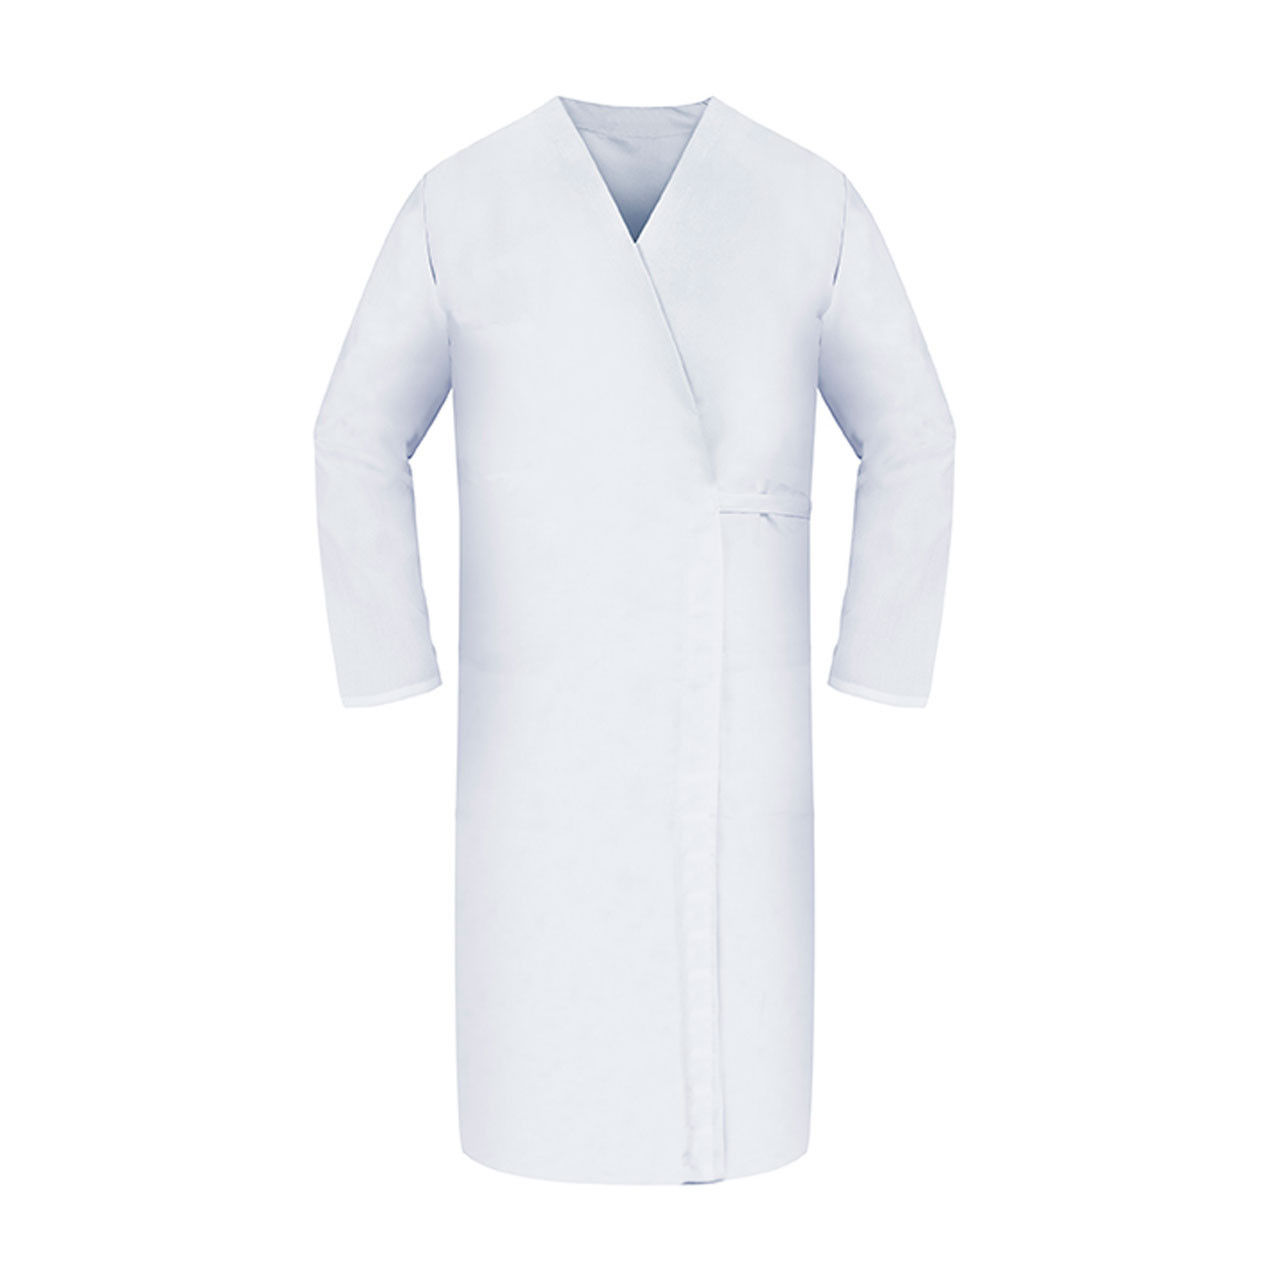 Does the white smock, known as the HACCP Smock Wrap, LS, White, come with pockets?